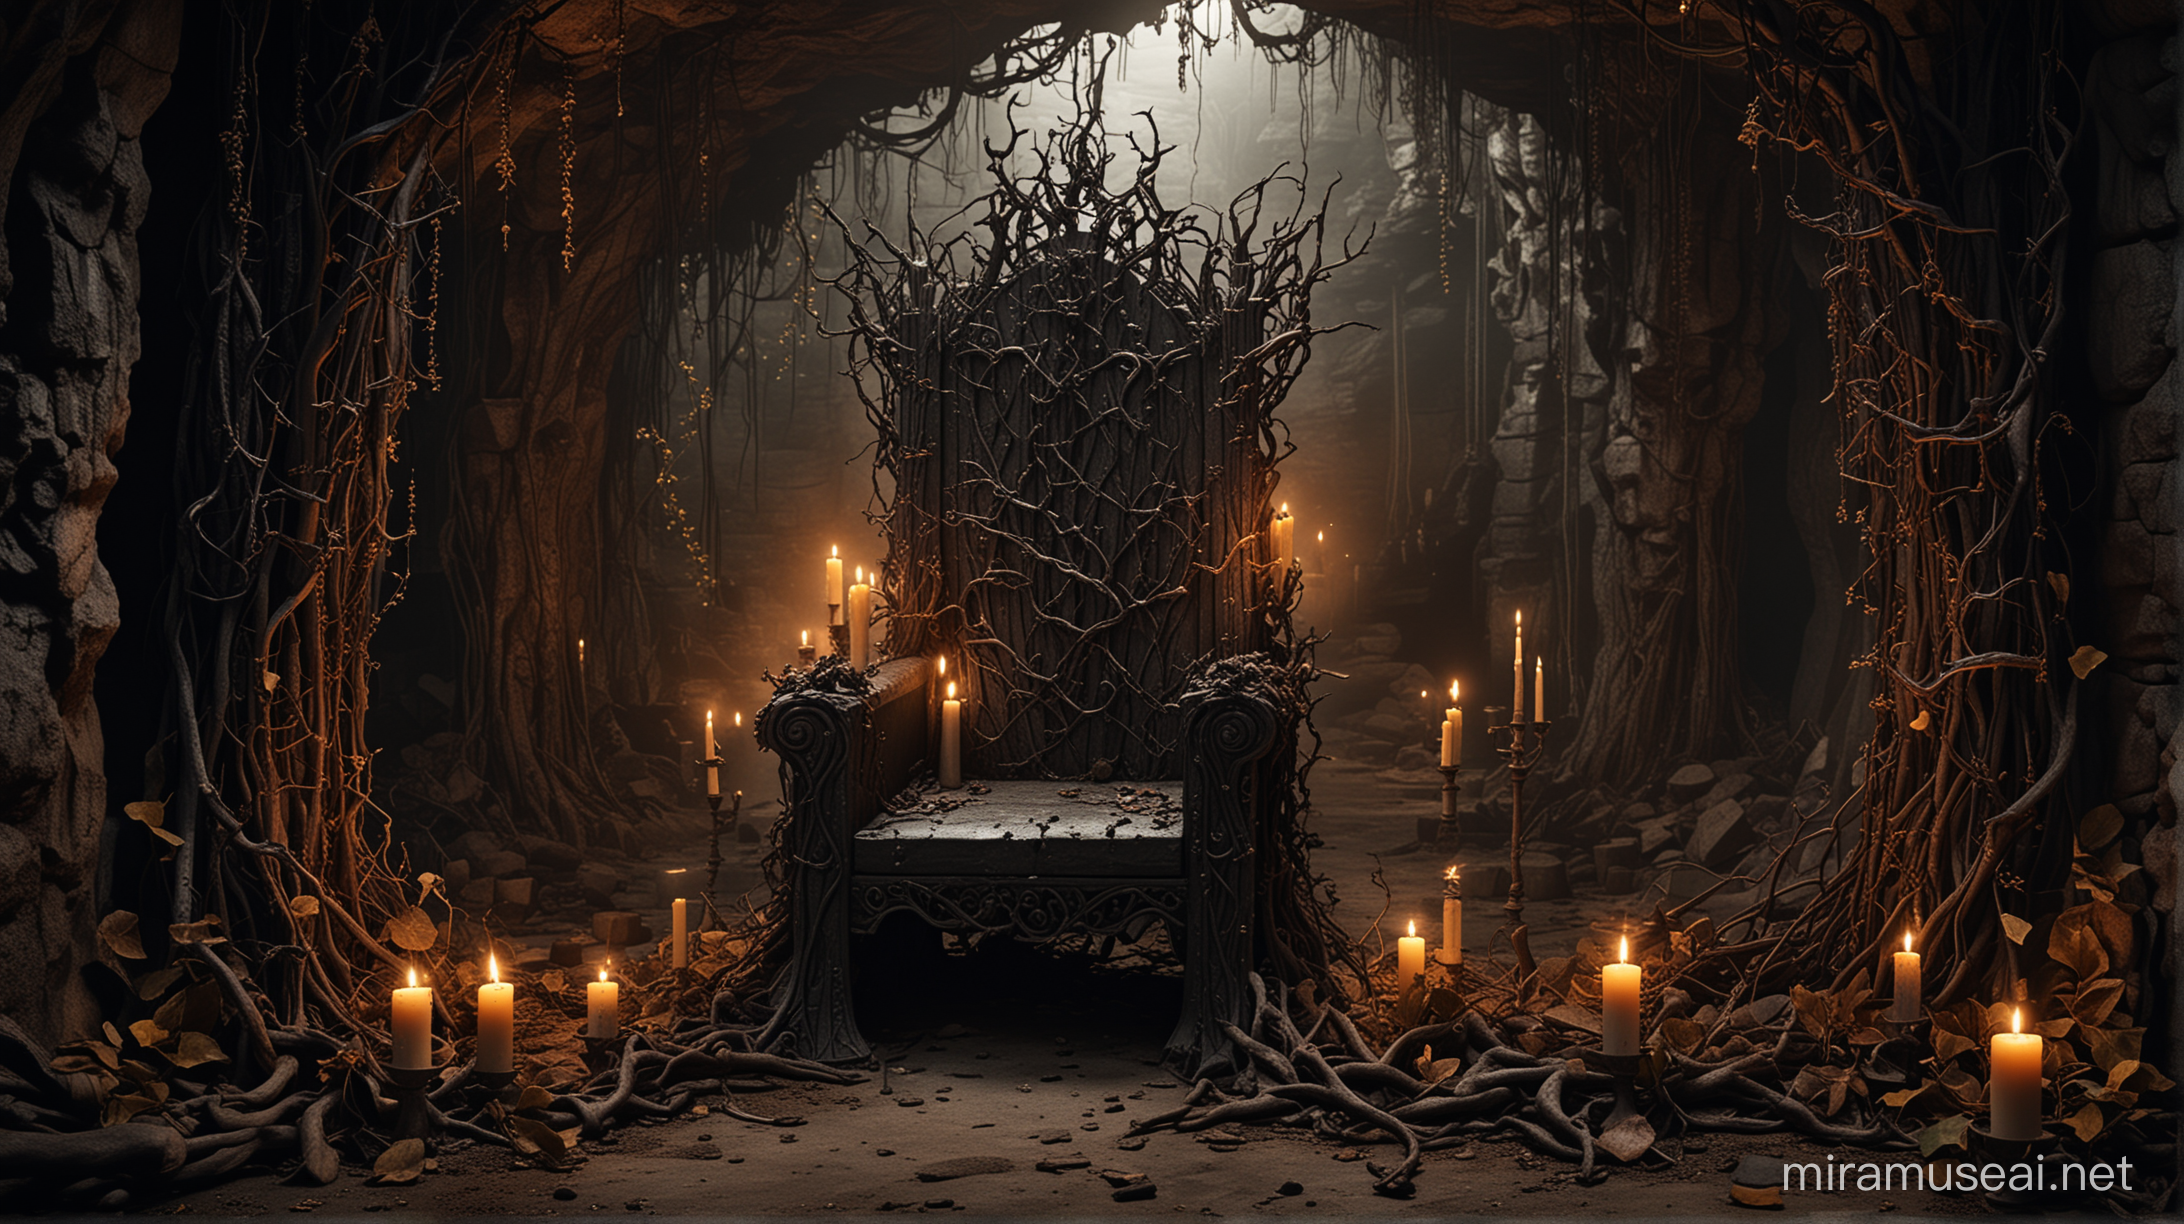 Decay Throne Surrounded by Vines and Candles in Enchanted Cave